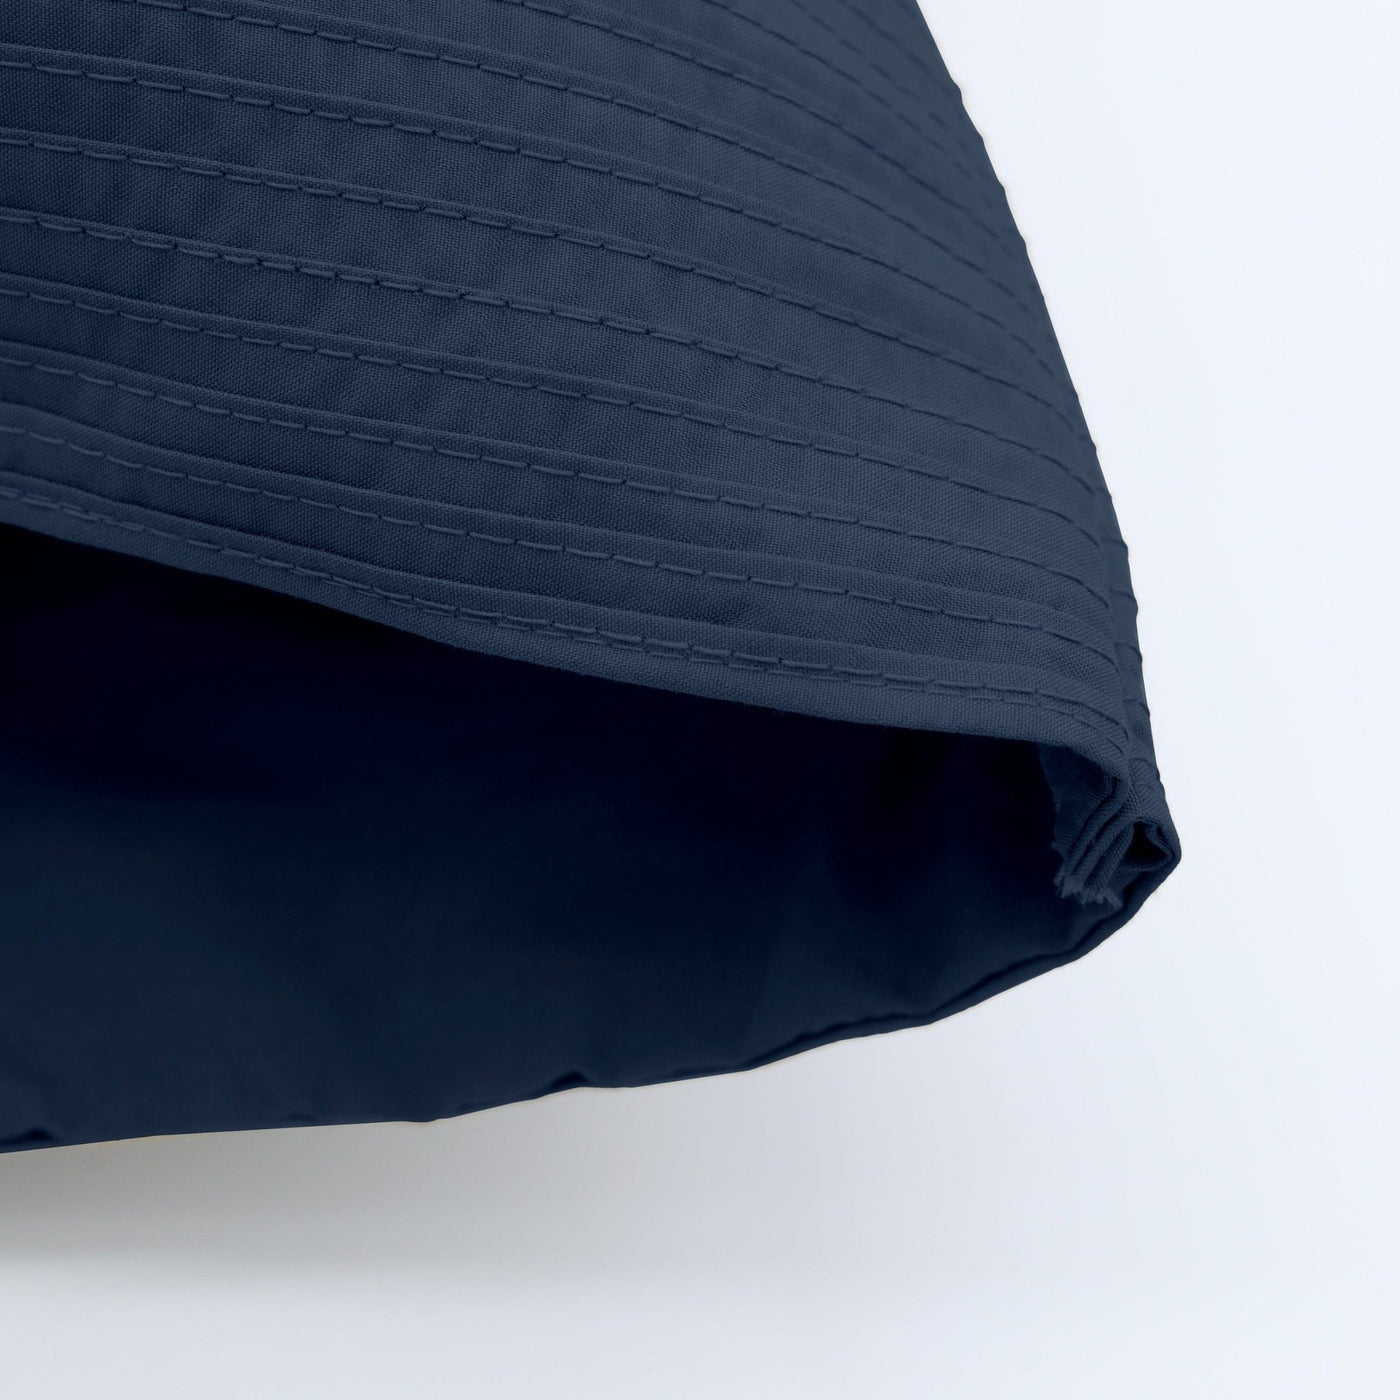 Details and Texture of Vilano Pleated Pillow Cases in Dark Blue#color_vilano-dark-blue